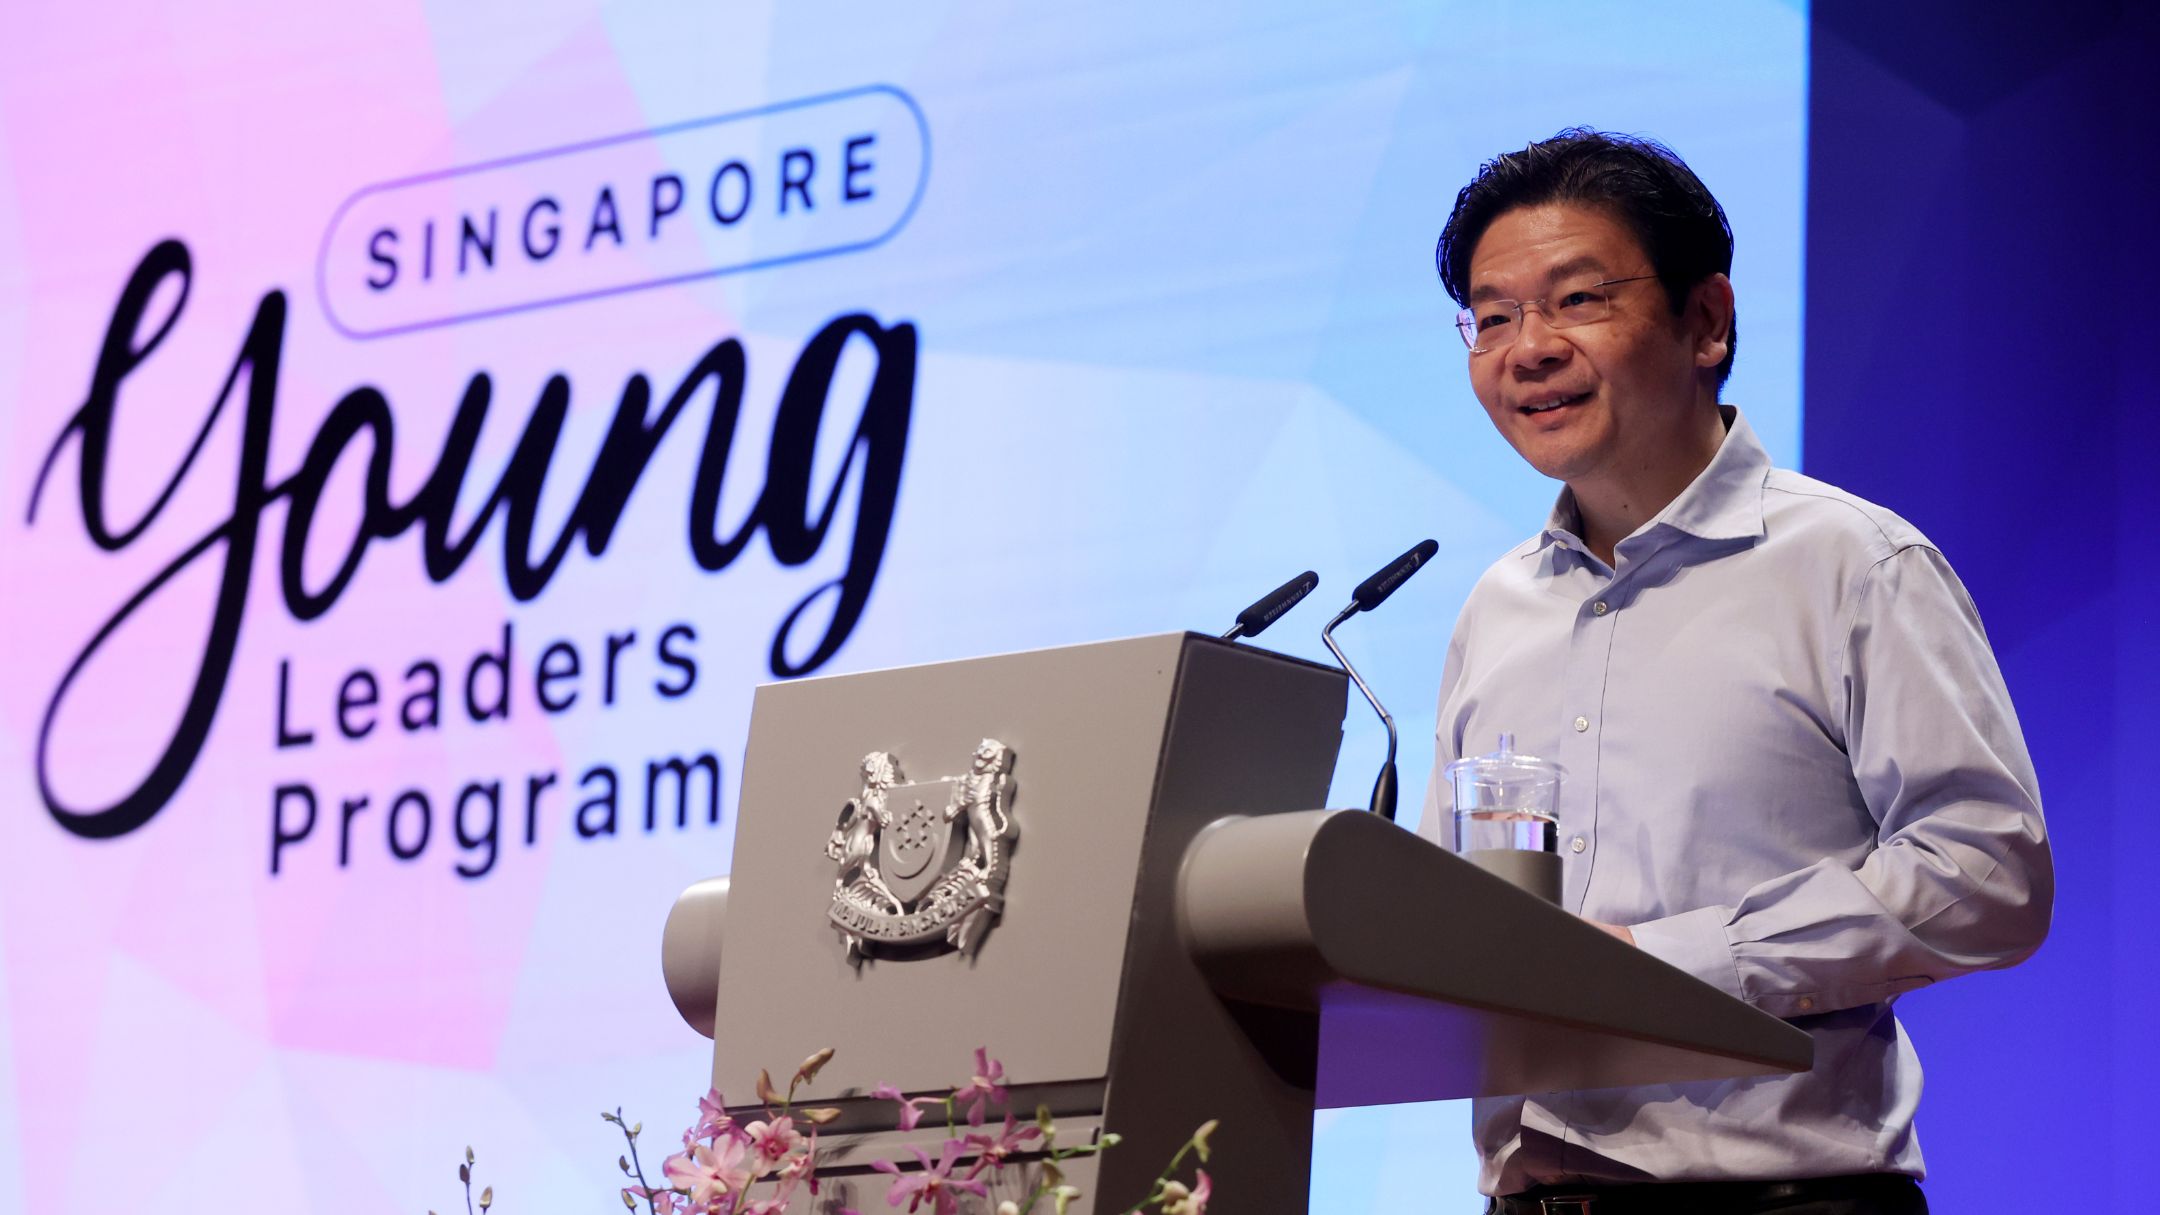 DPM Wong at the Launch of the Lee Kuan Yew Centennial Fund and Singapore Young Leaders ProgrammeFeat